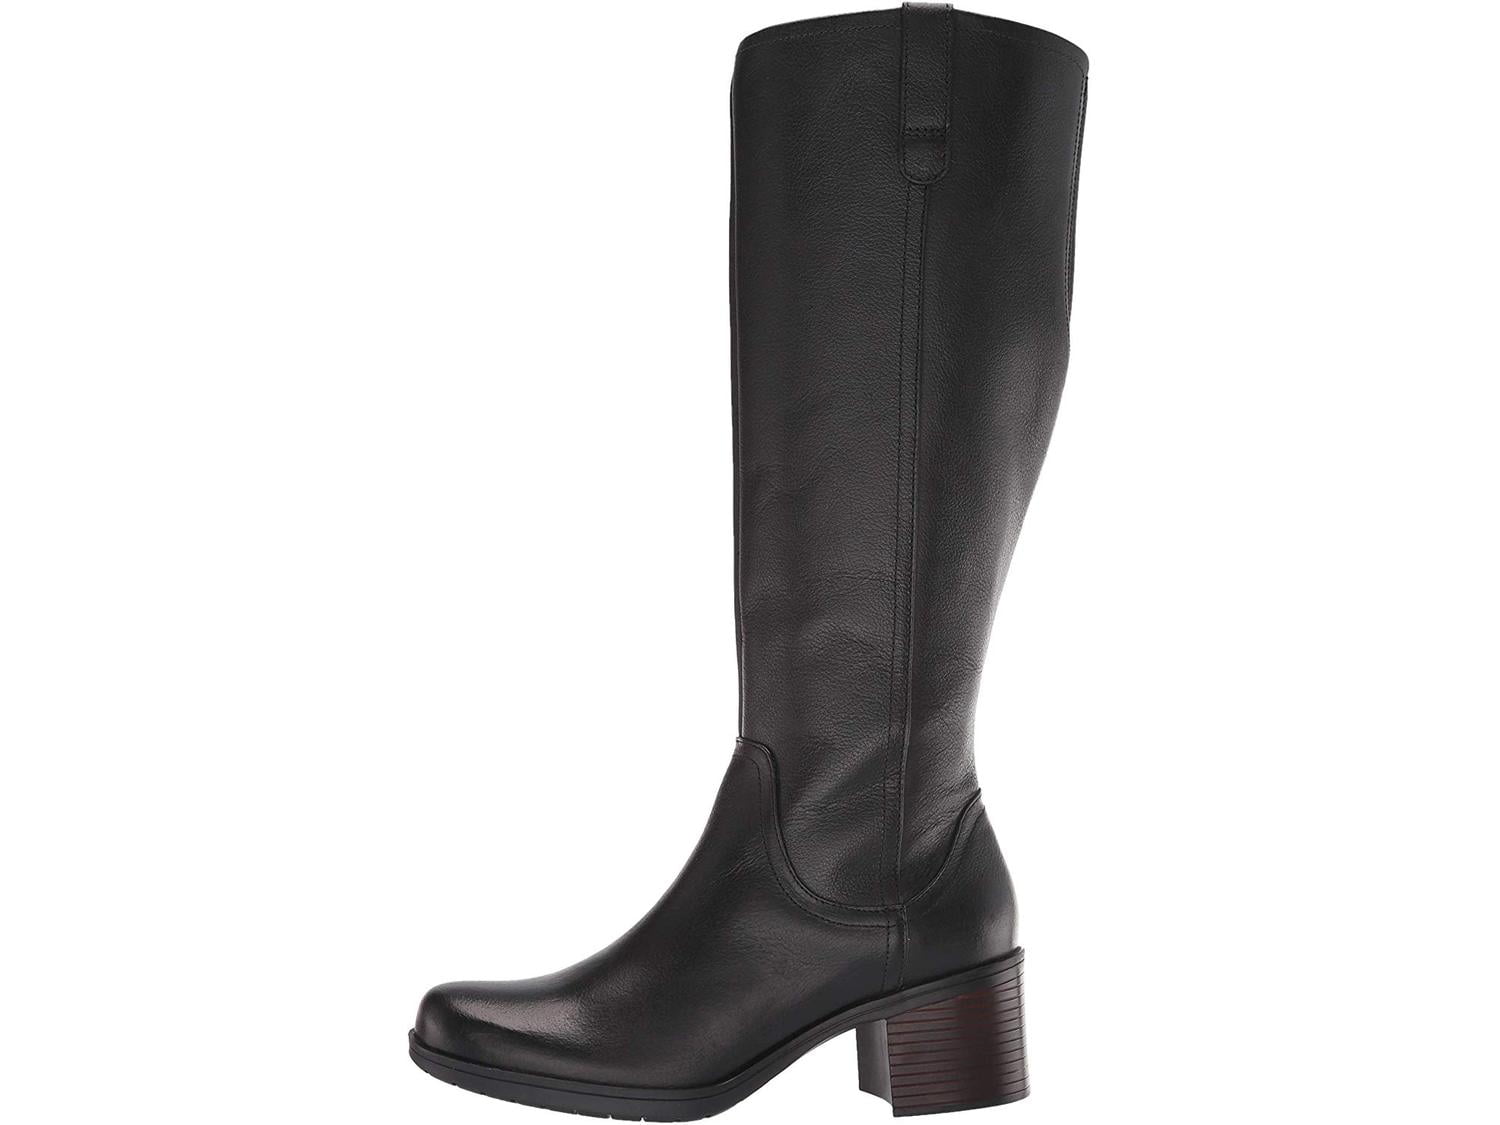 Details about   Ladies Clarks Casual/Smart Knee High Boots Marilyn Abby 